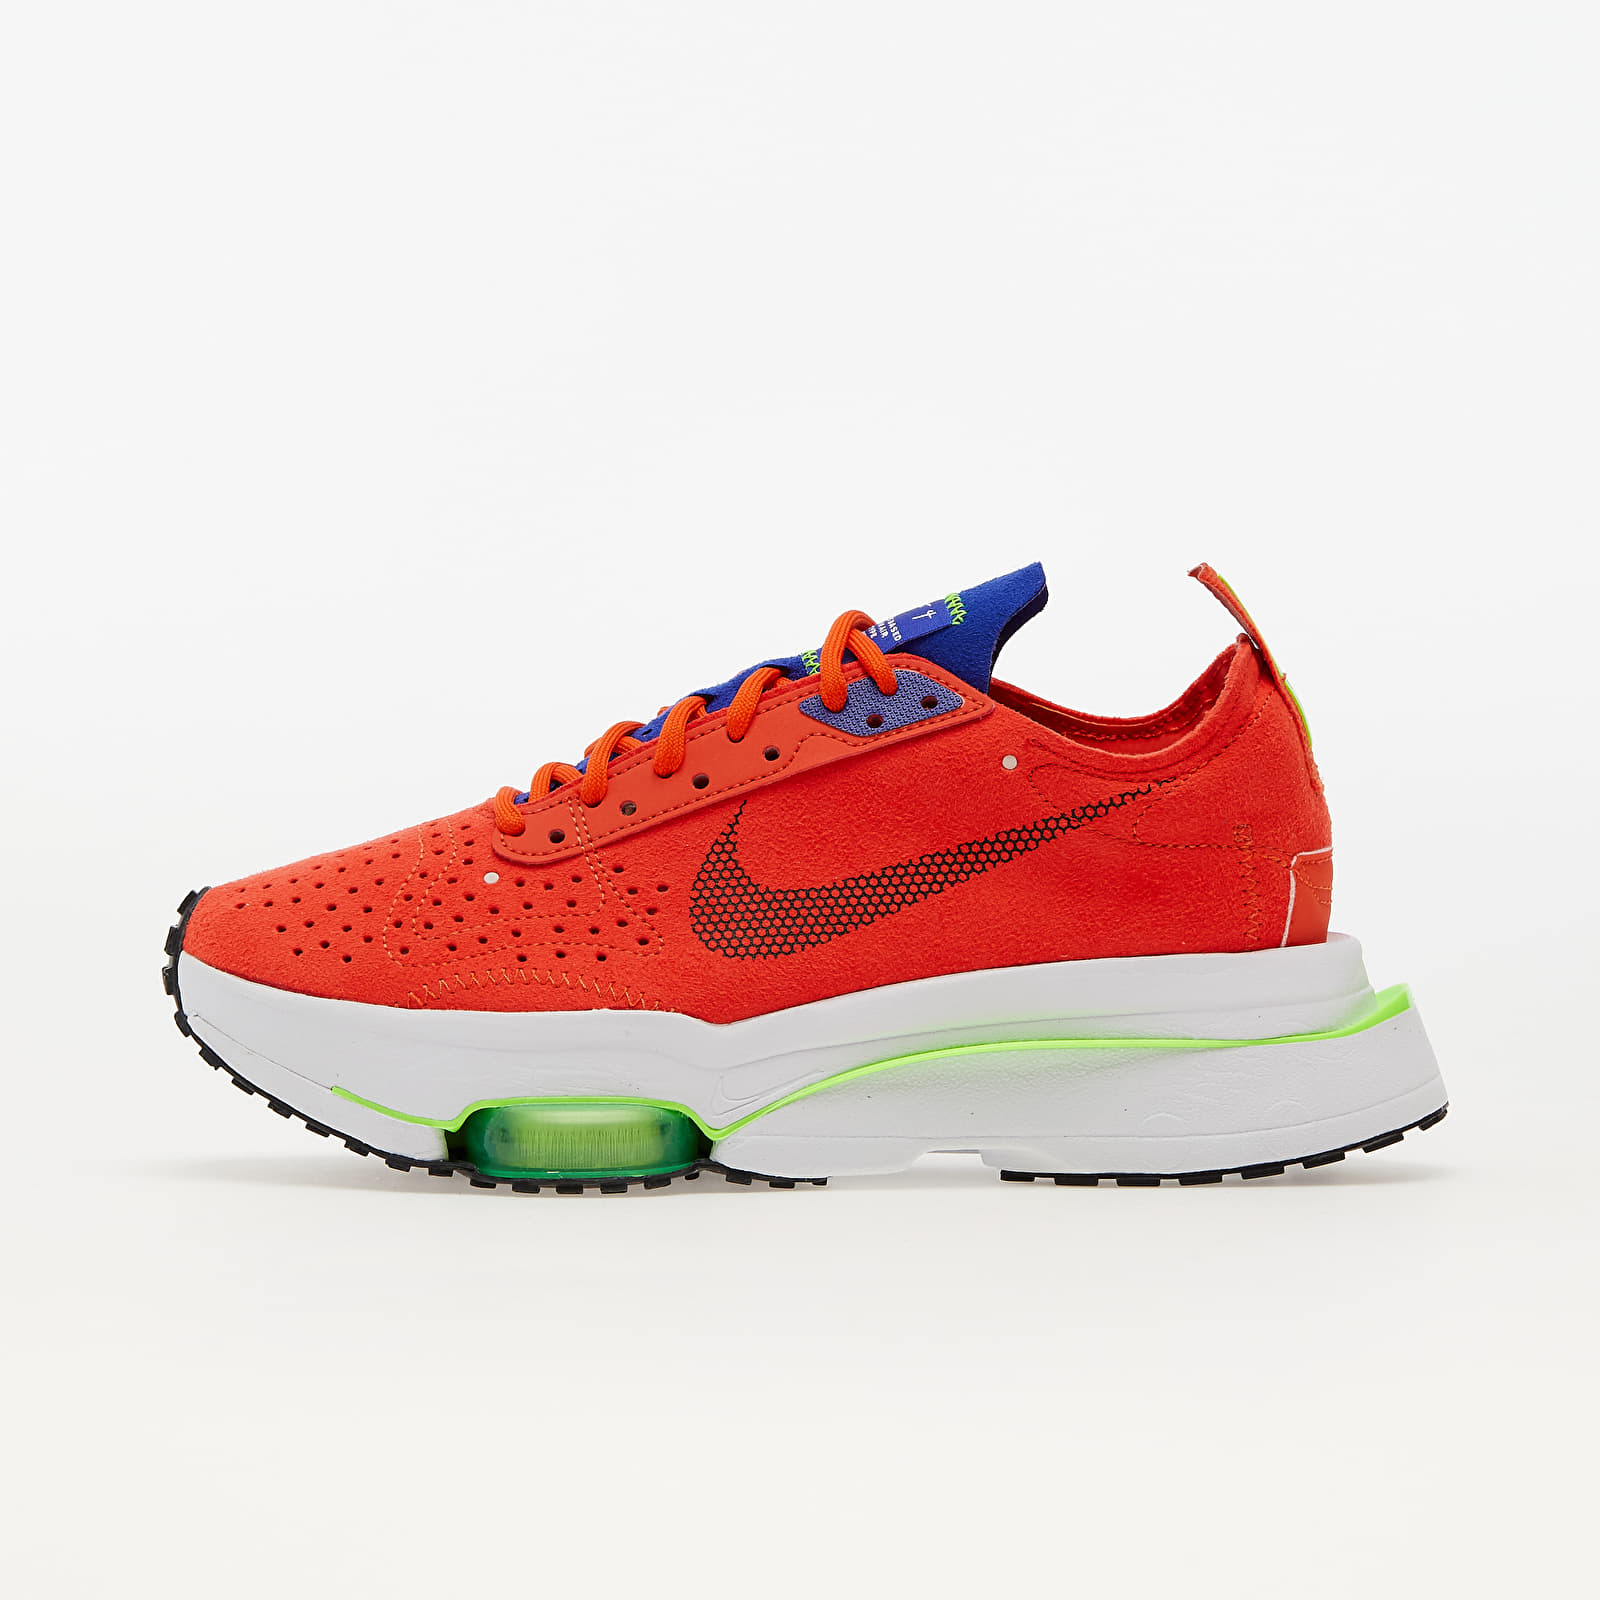 Chaussures et baskets femme Nike W Air Zoom-Type Tm Orange/ Black-Concord-Electric Green